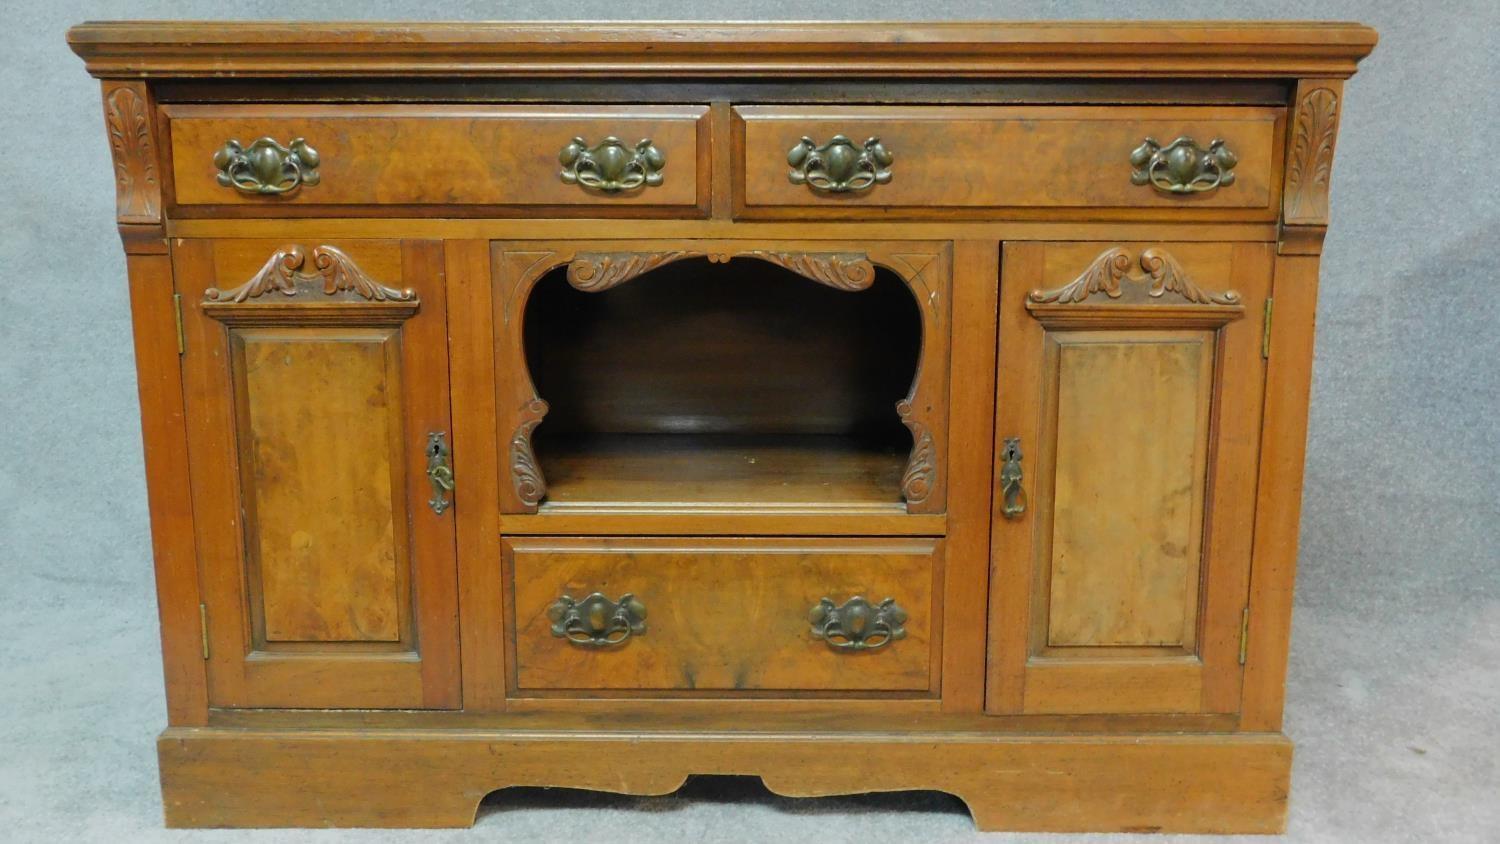 A late Victorian carved walnut sideboard fitted drawers and cupboards on bracket feet. H.94 W.137